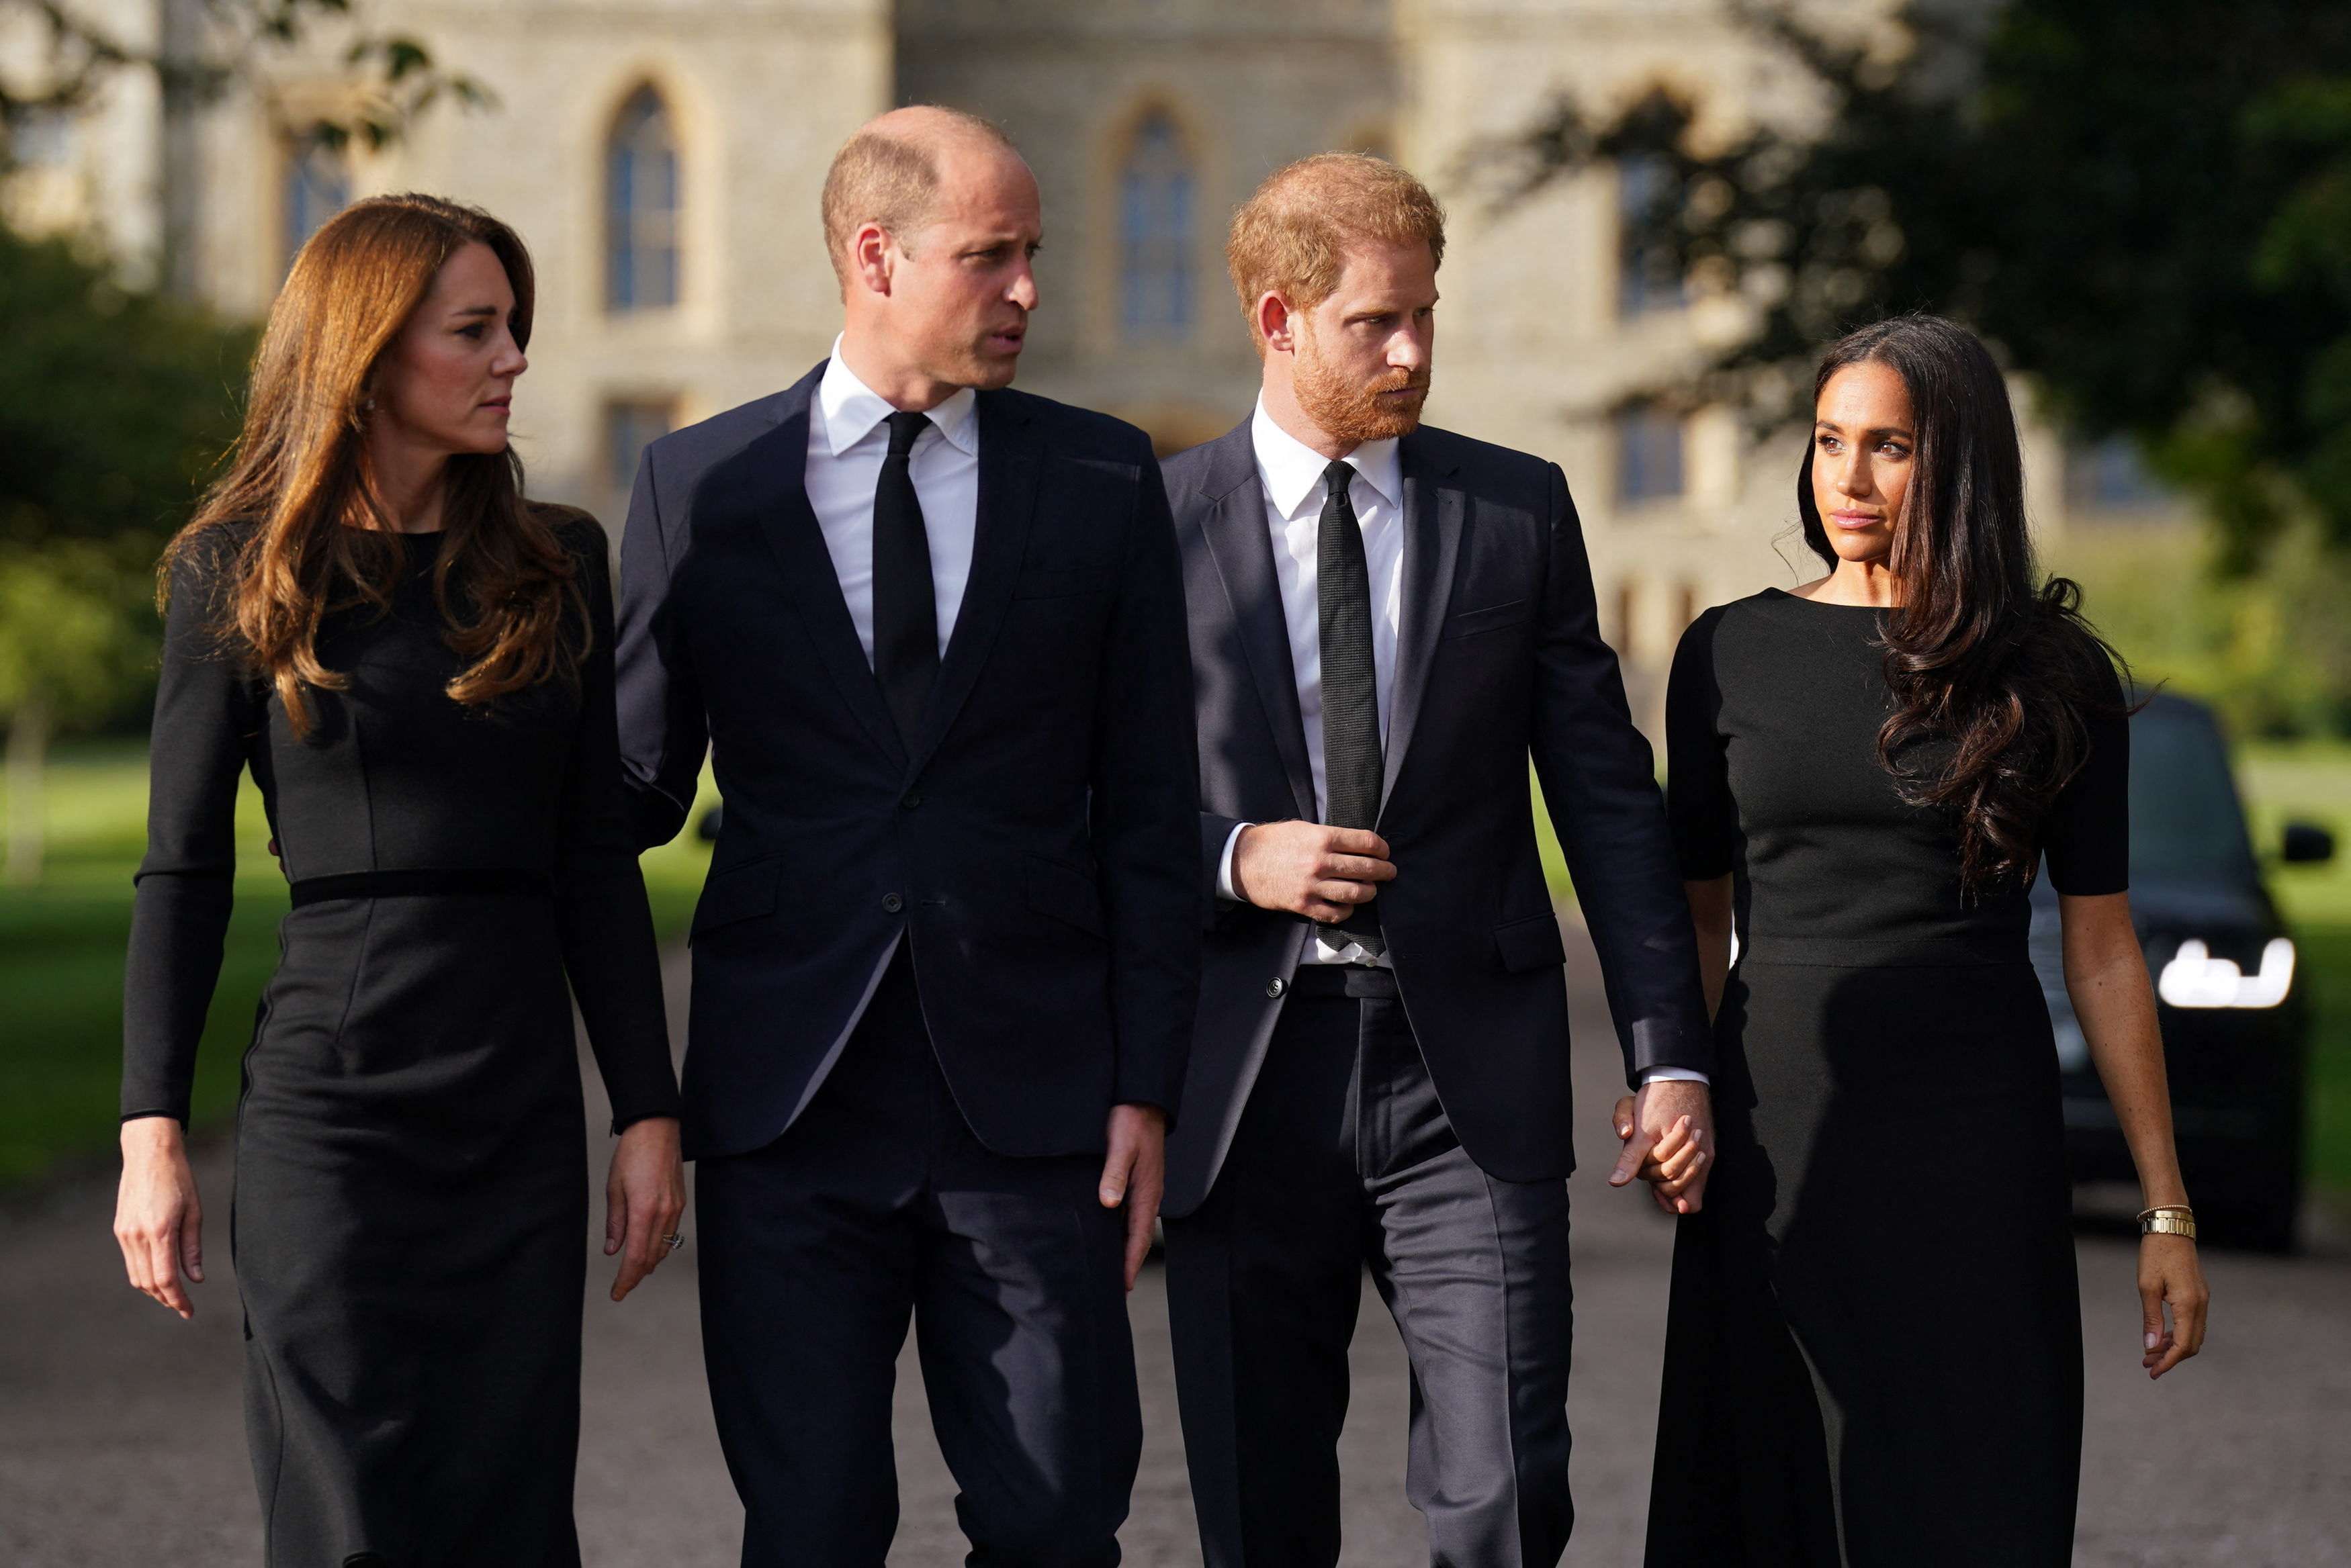 Princess Catherine, Prince William, Prince Harry, and Meghan Markle walk on September 10, 2022, at Windsor Castle, England. | Source: Getty Images